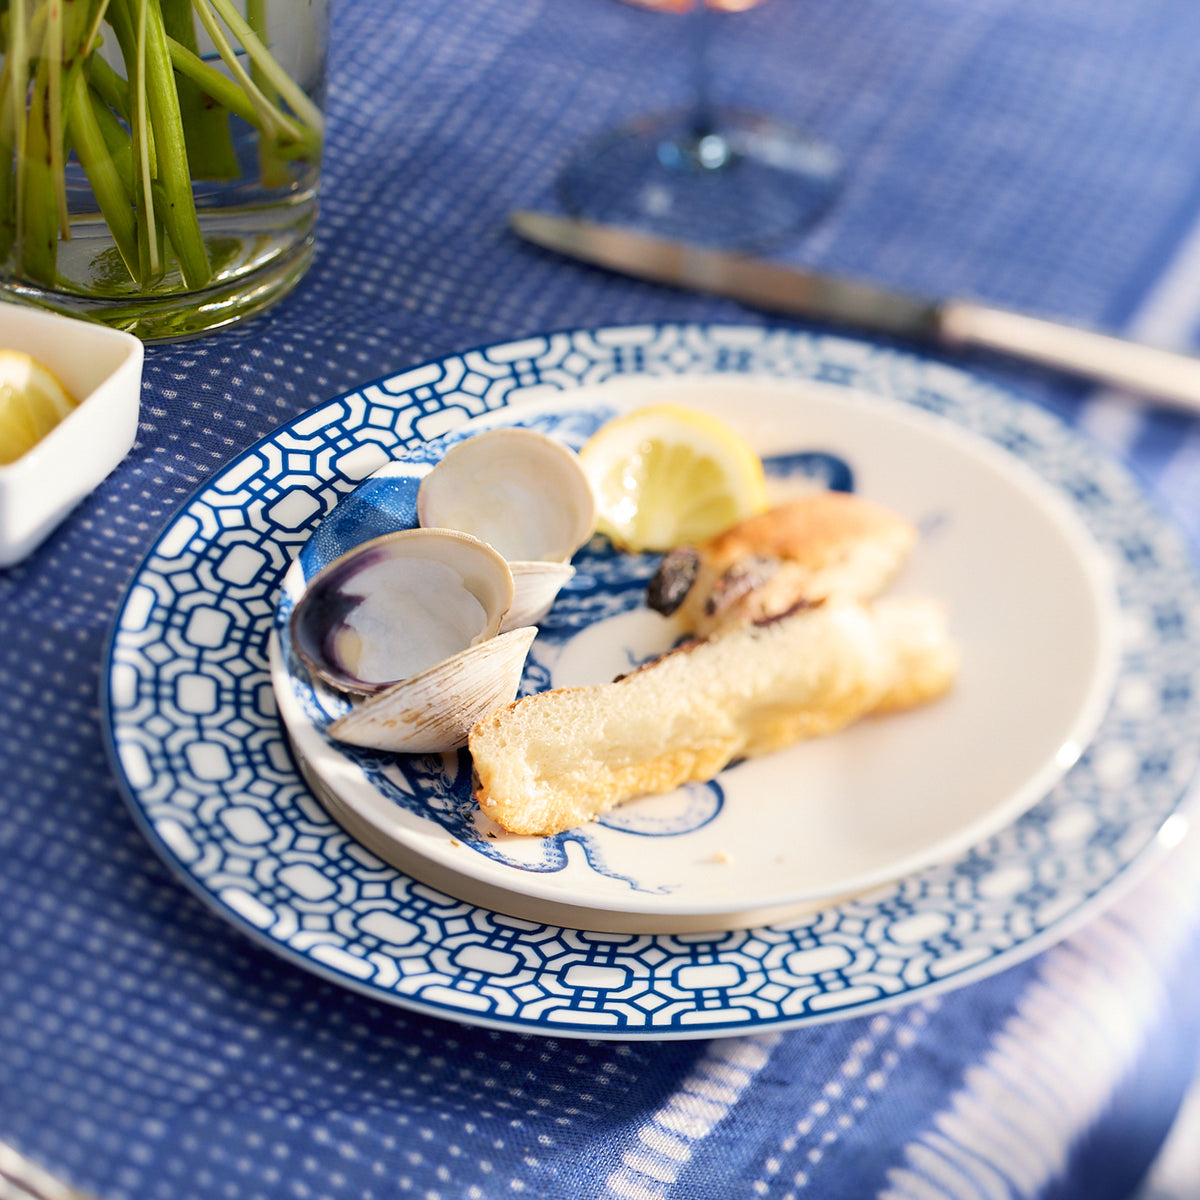 A plate with fried fish sticks, clams in shells, and lemon wedges sits elegantly on a blue and white patterned tablecloth, adding a contemporary note. The dish is presented on the Newport Garden Gate Rimmed Salad Plate from Caskata Artisanal Home.